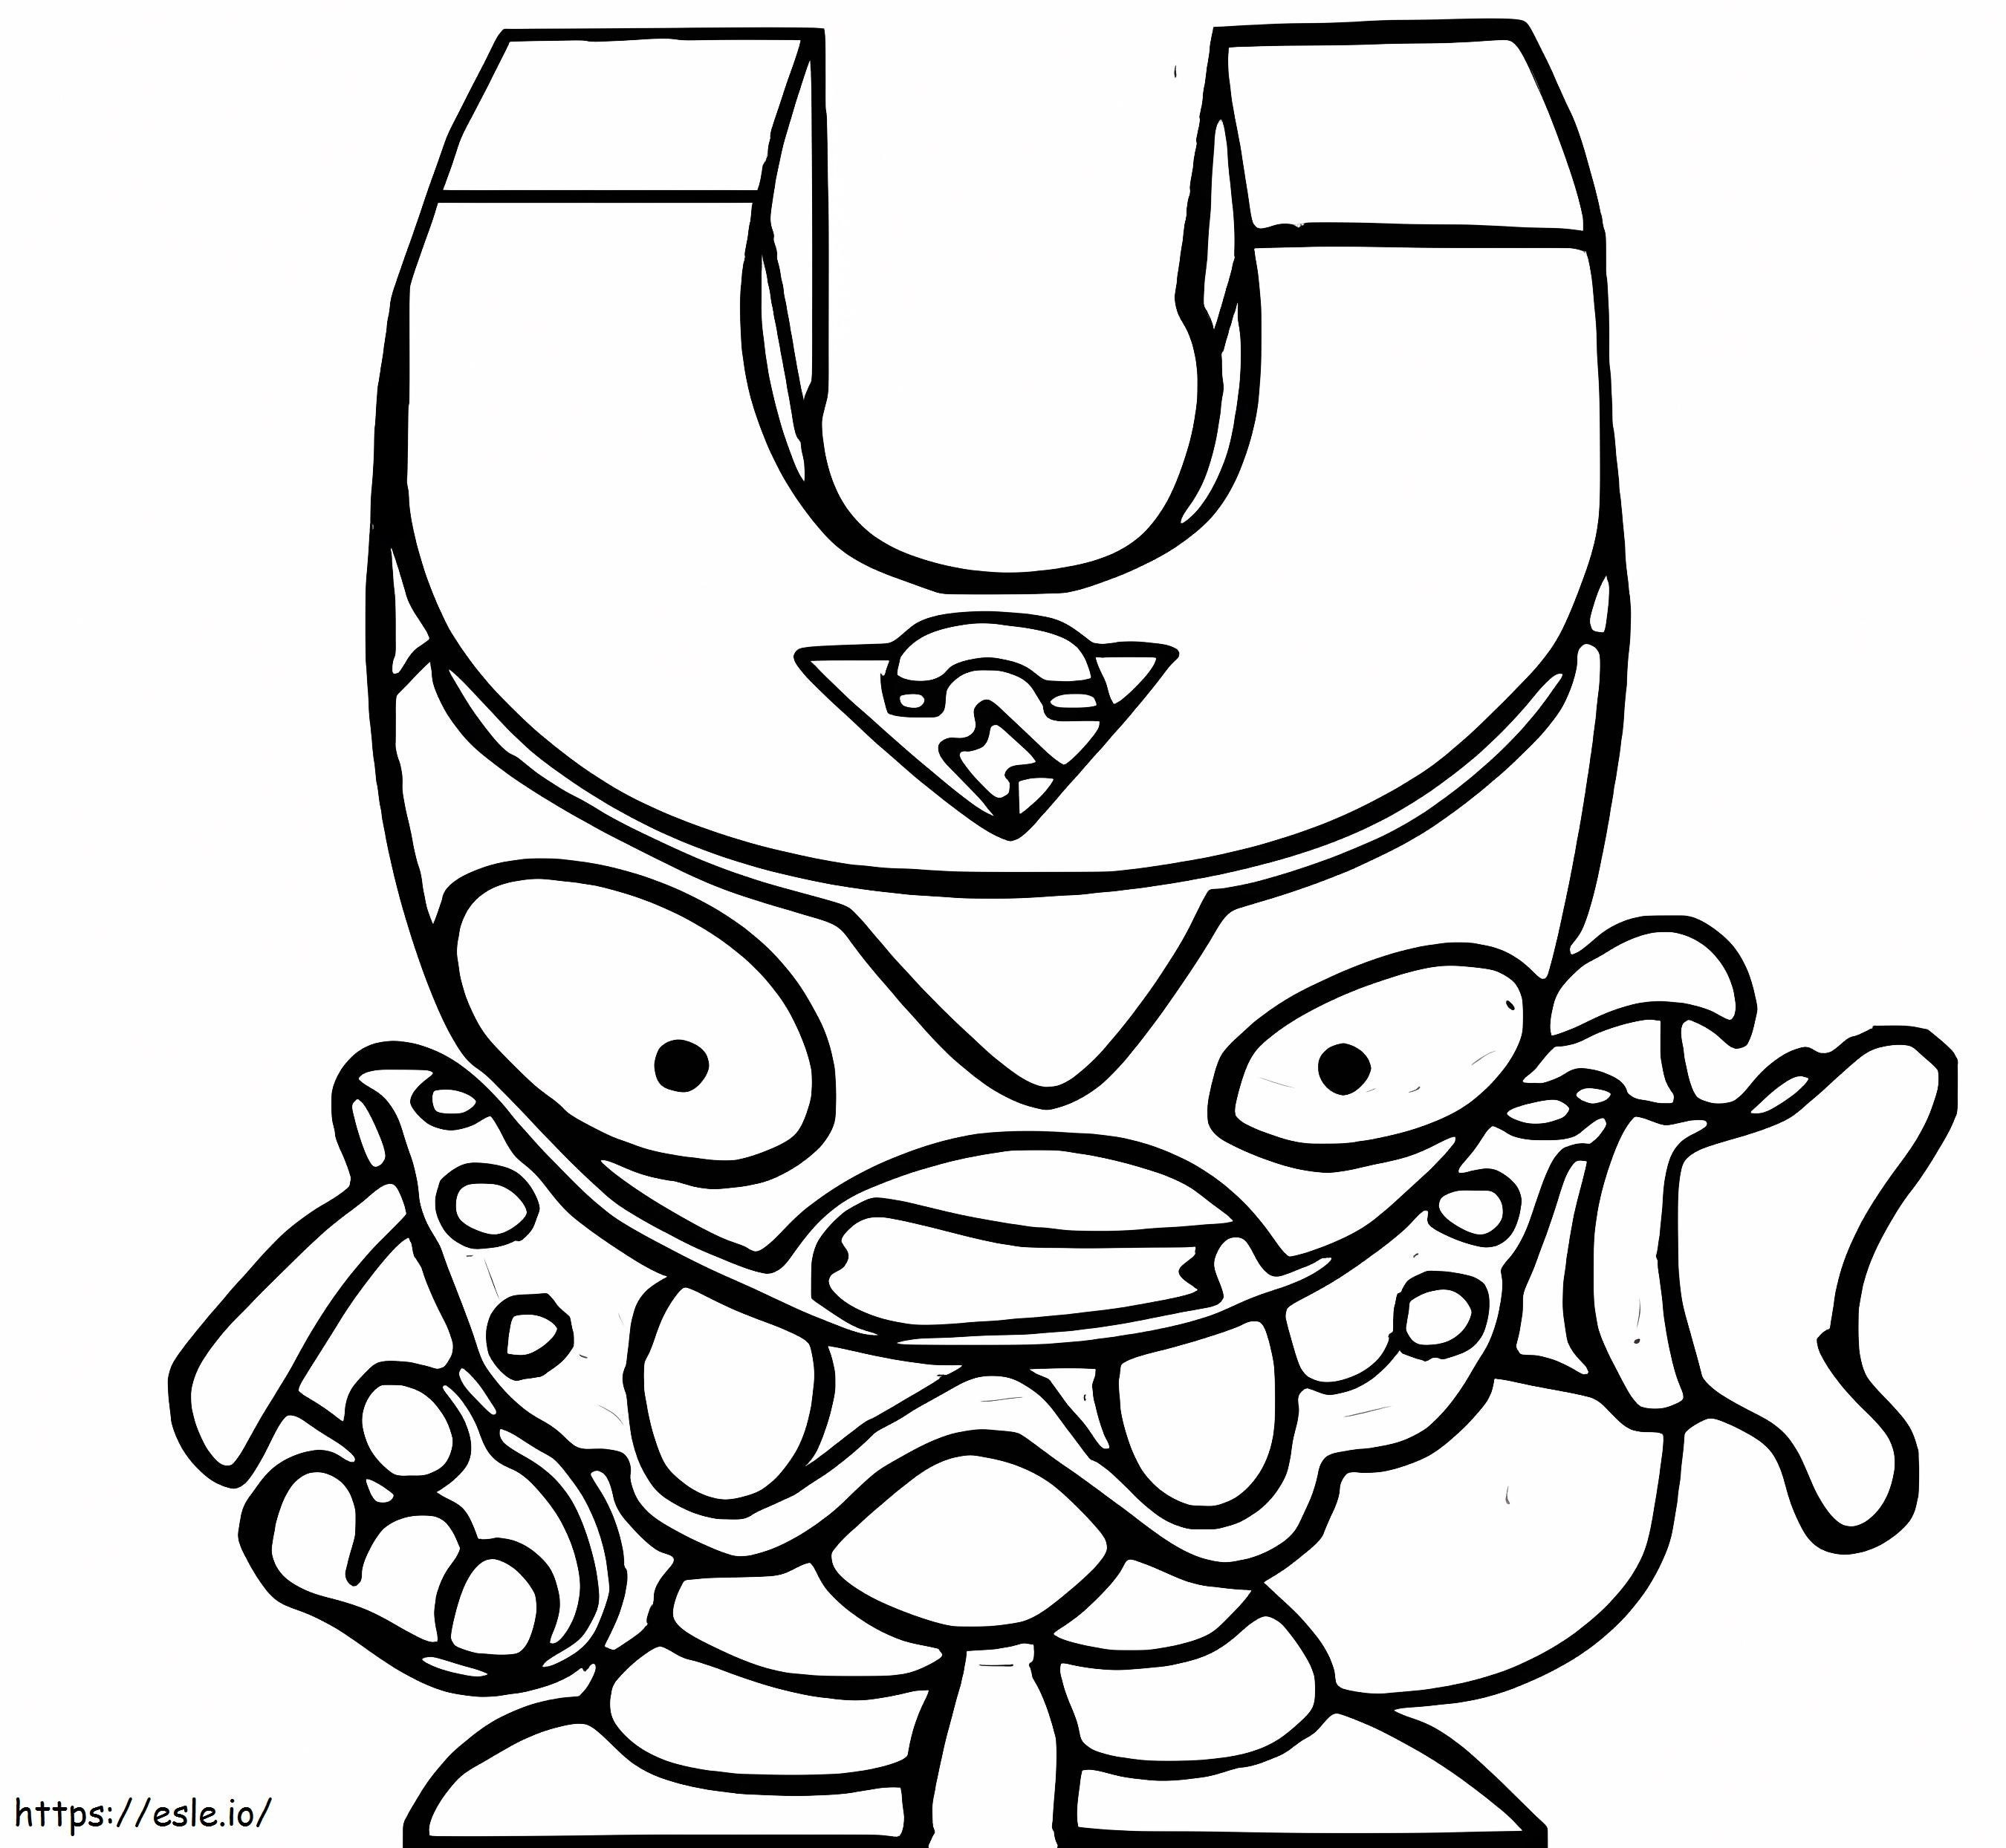 Darknetic Superzings coloring page